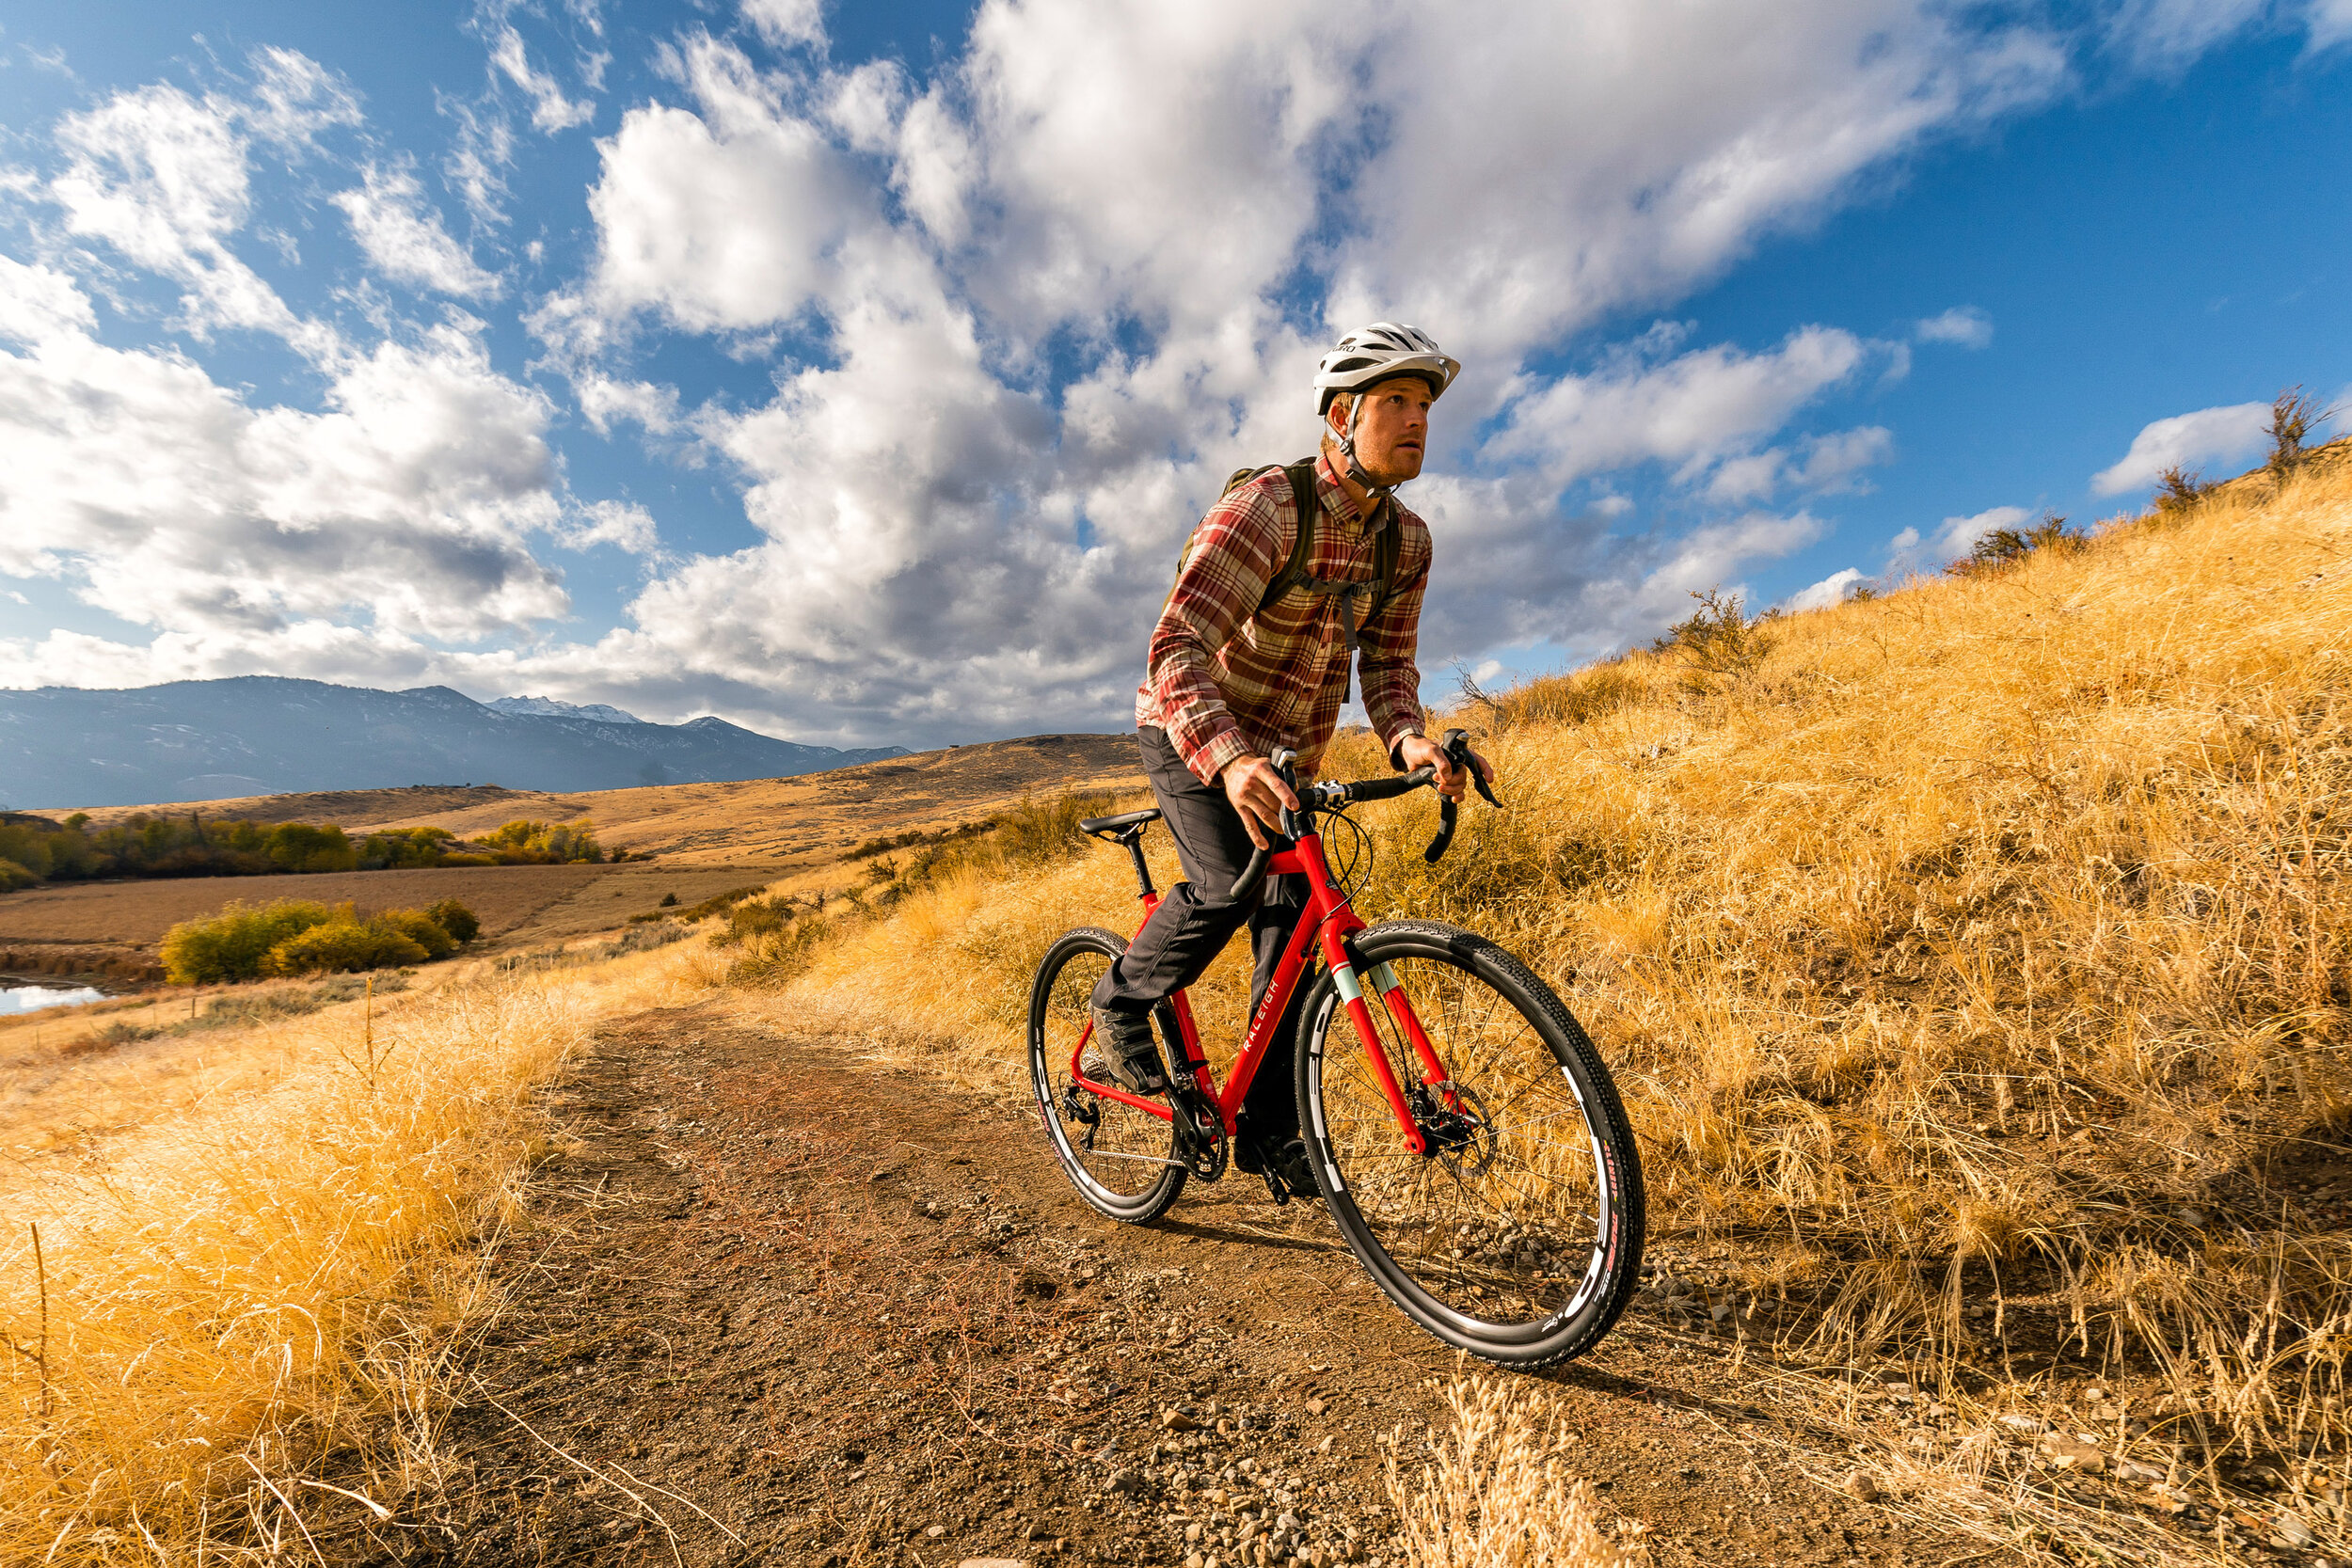  Lifestyle: Sam Olive bike riding in the Methow Valley in autumn, Winthrop, Washington 